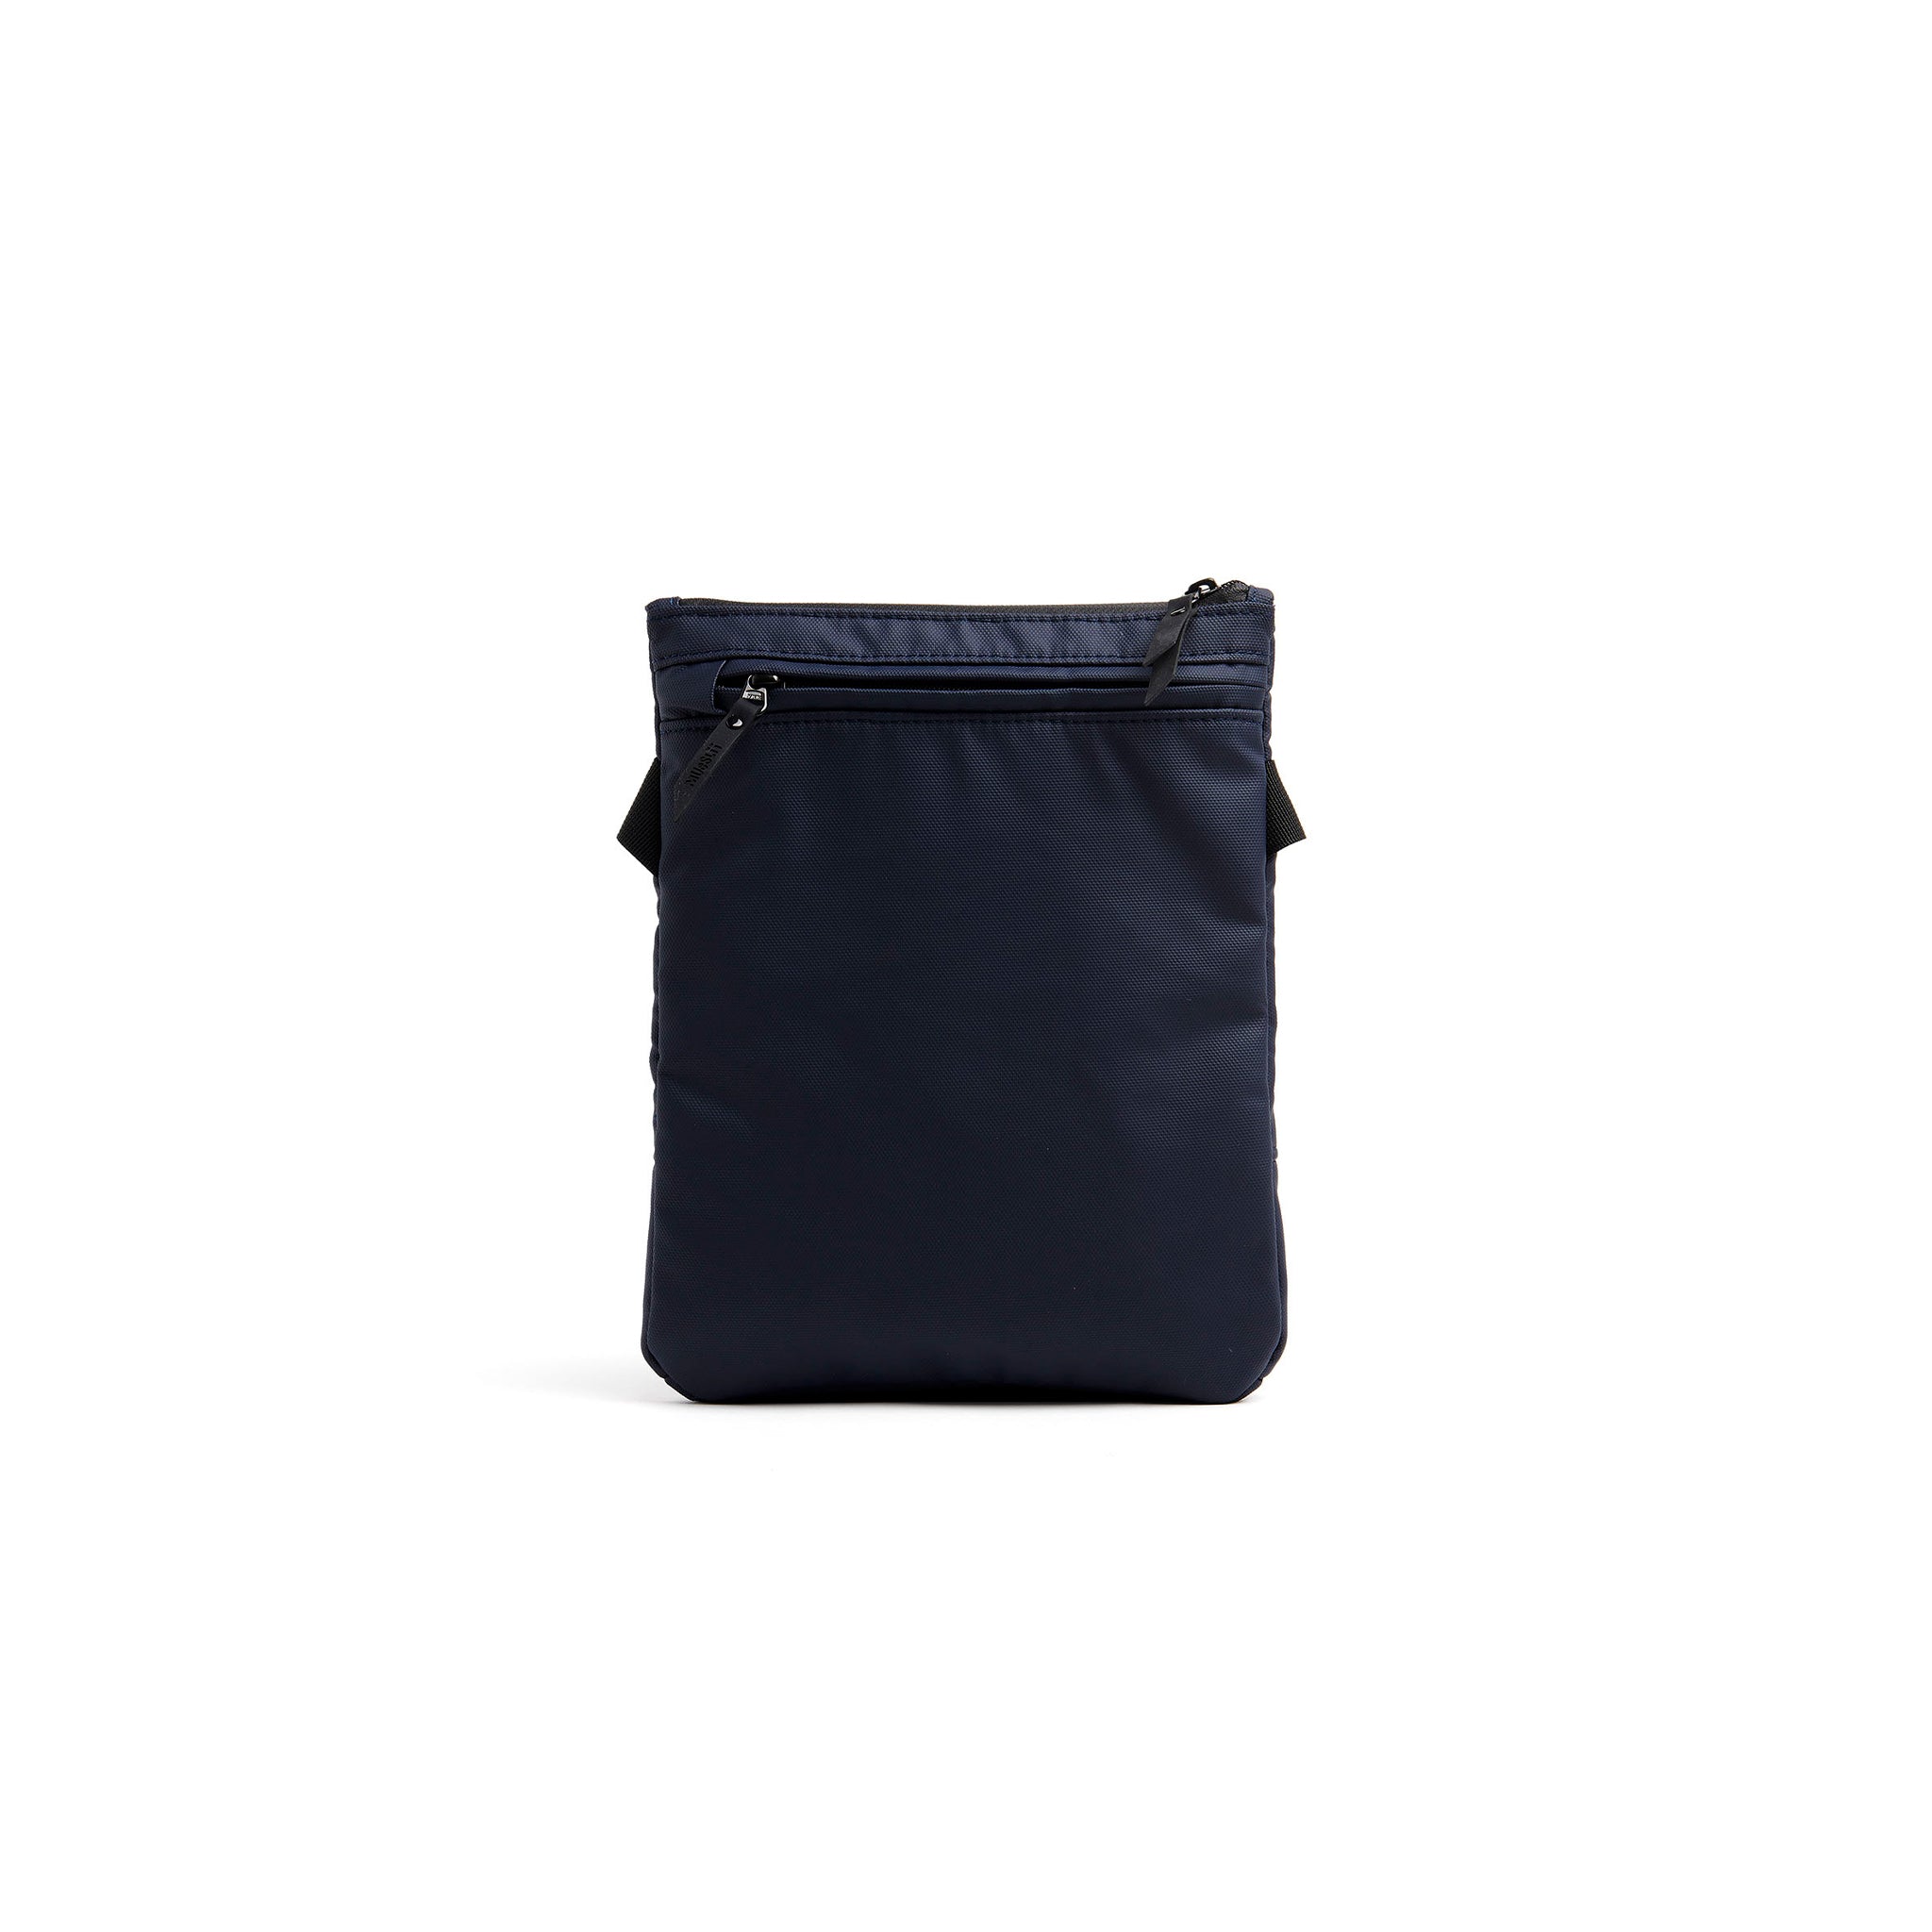 Mueslii crossbody, made of PU coated waterproof nylon, color midnight blue, back view.